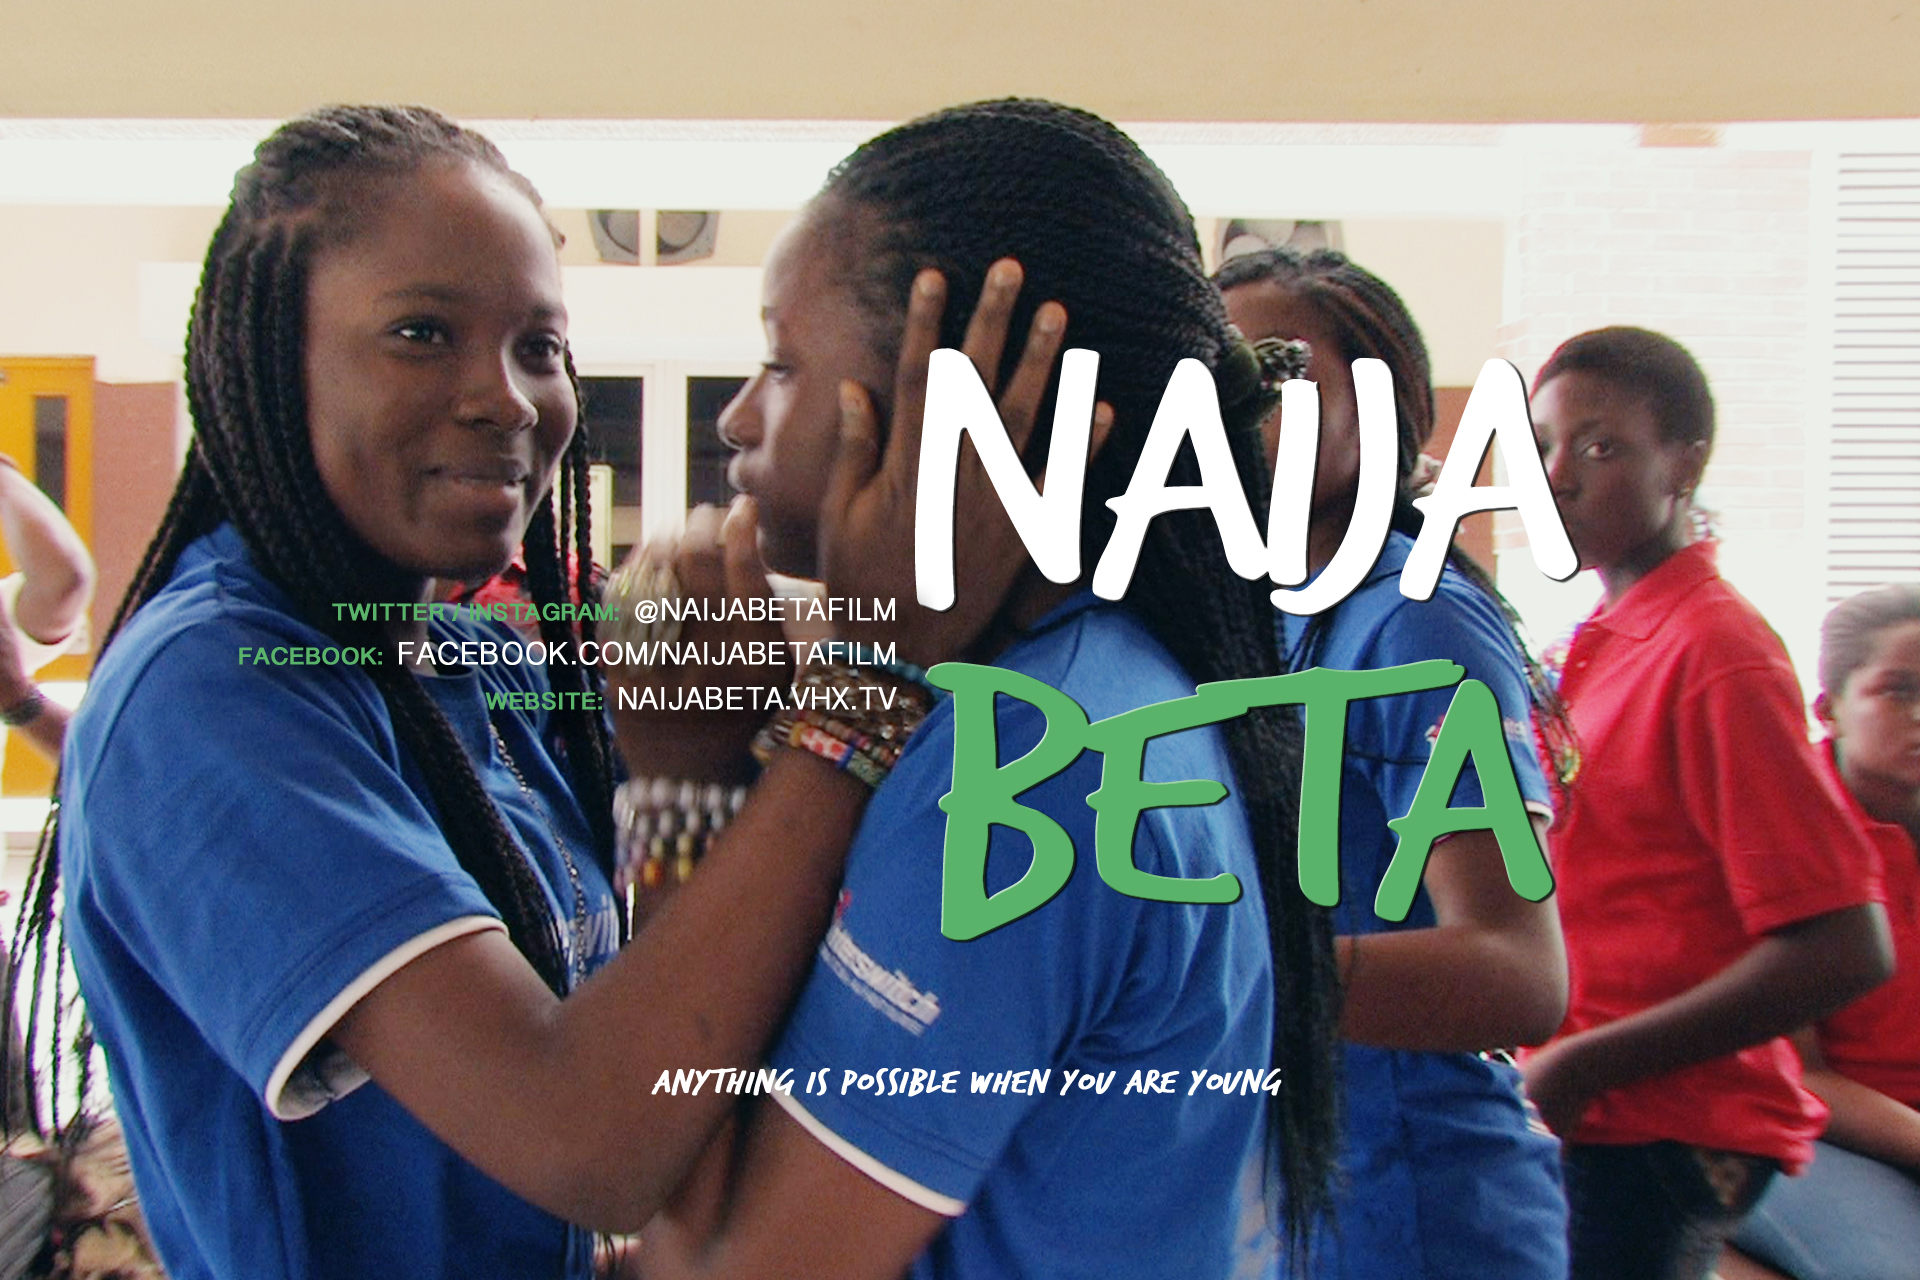 Naija Beta will be screened Wednesday, Sept. 28, on MIT campus. Click the image for more details.